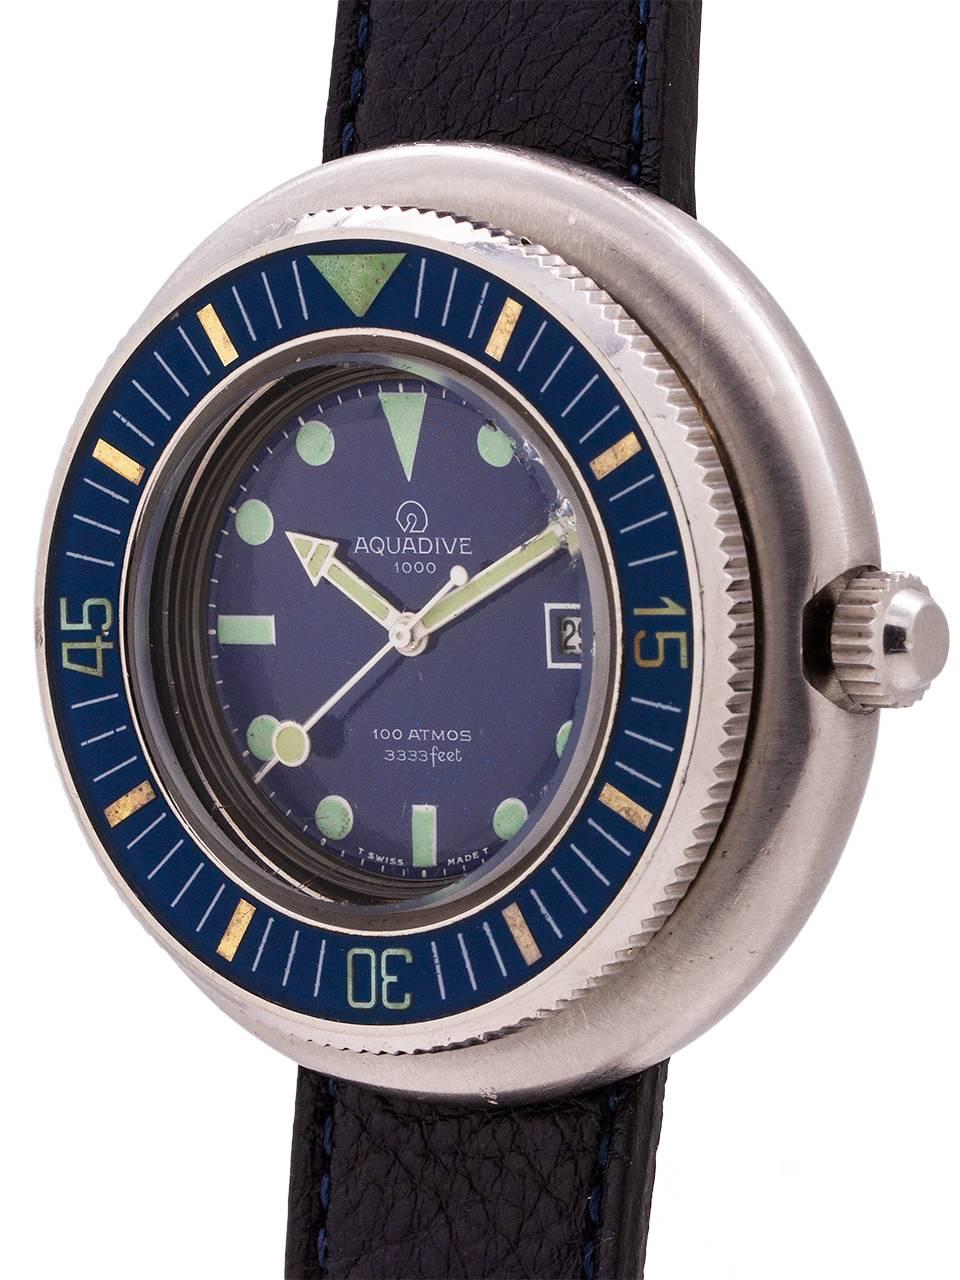 
Vintage circa late 1960’s Swiss Aquadive. Featuring a large and thick 50mm “saucer shaped” stainless steel case with a wide stepped up, blue bakelite elapsed time bezel. Featuring a mineral glass crystal, and great condition dark blue original dial